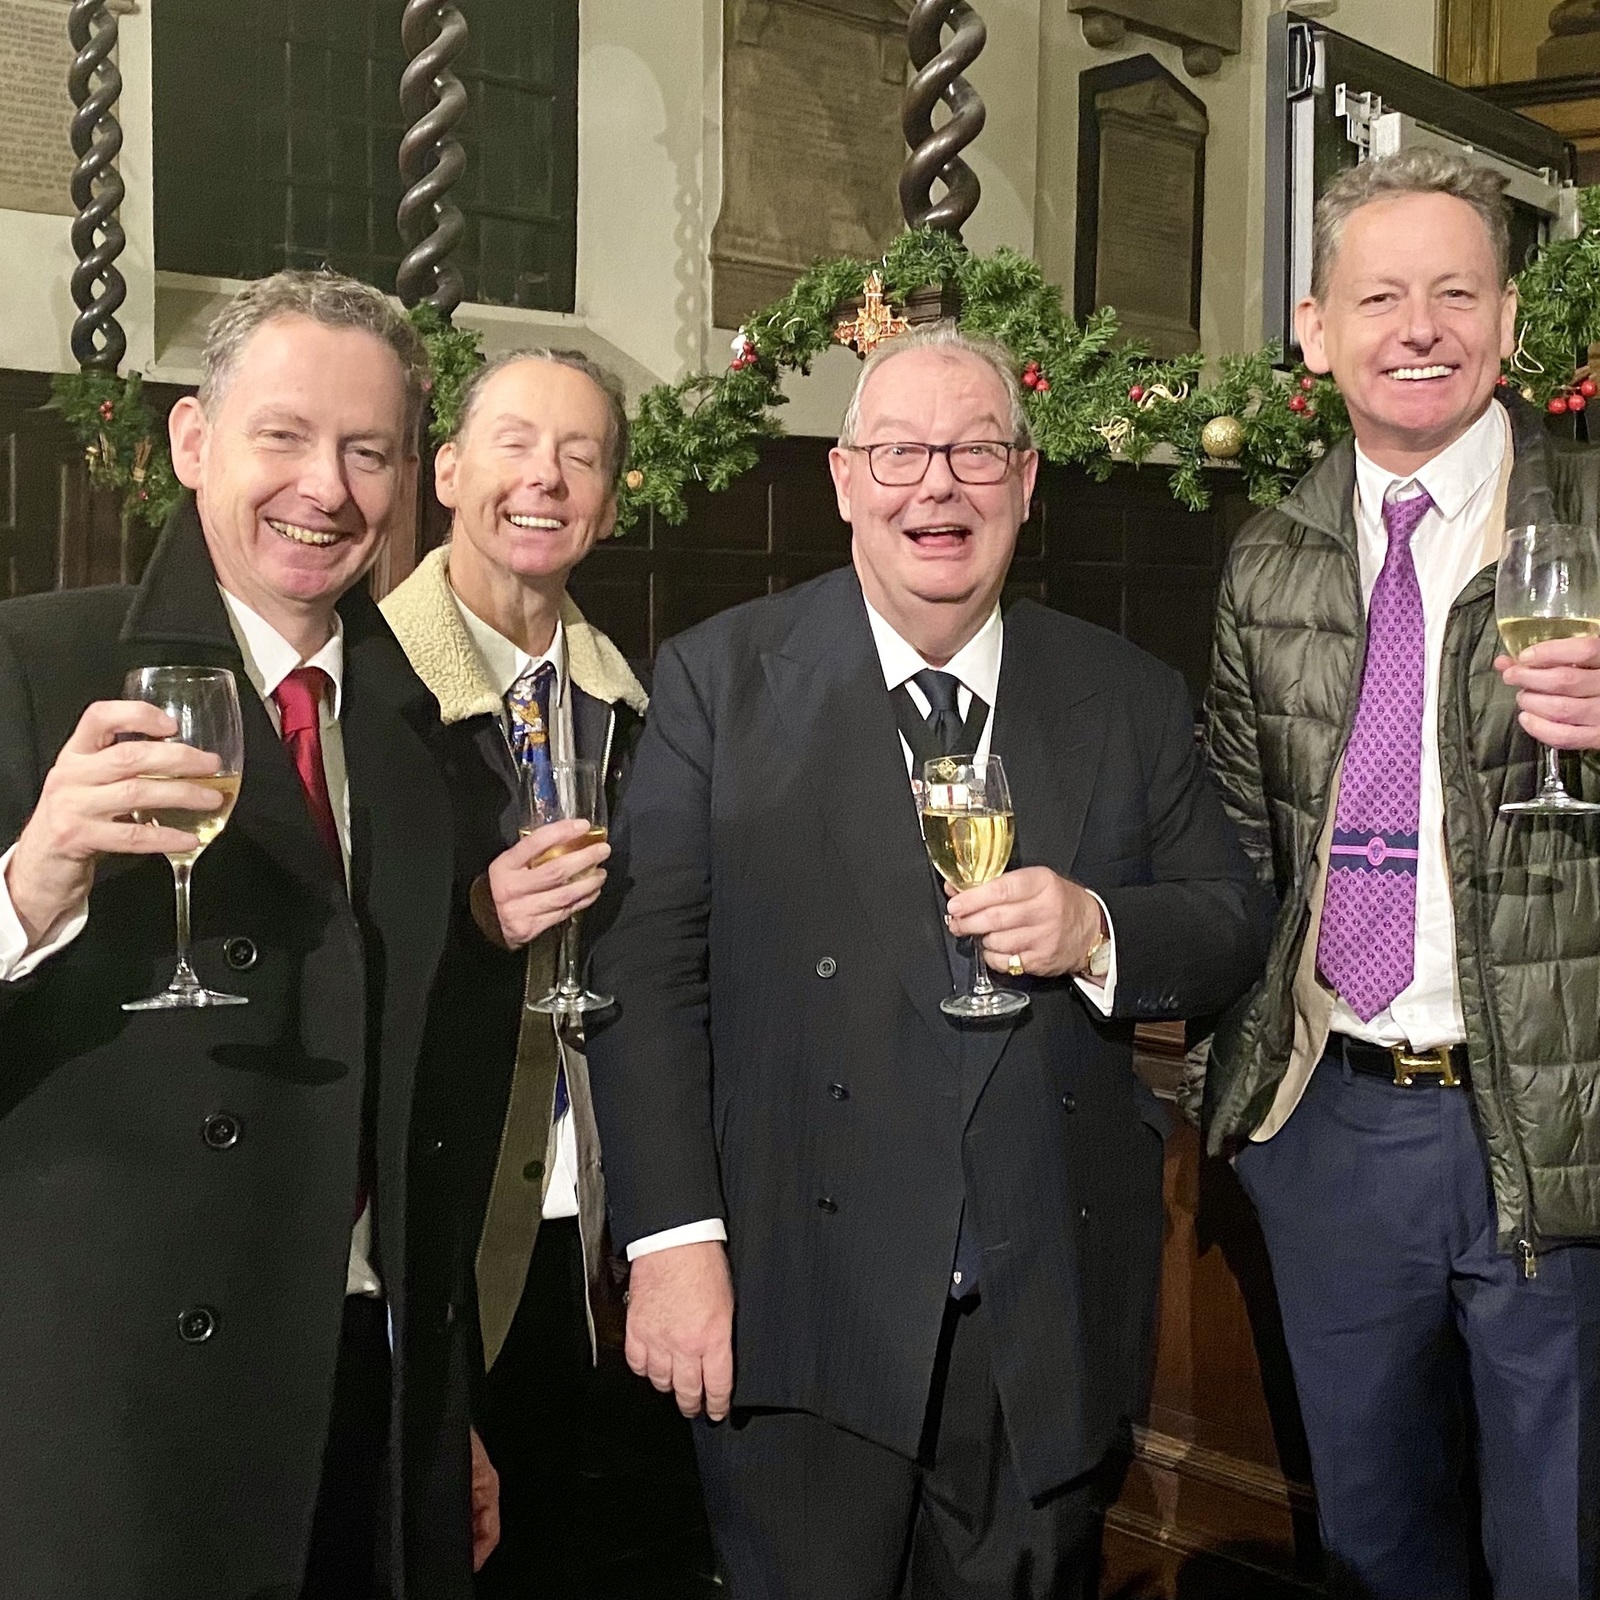 At the Carol service with The Guild of Freeman - Amazing to meet the Wellings Triplets – Stuart, David & Jonathan - born on Christmas Day 1963! 